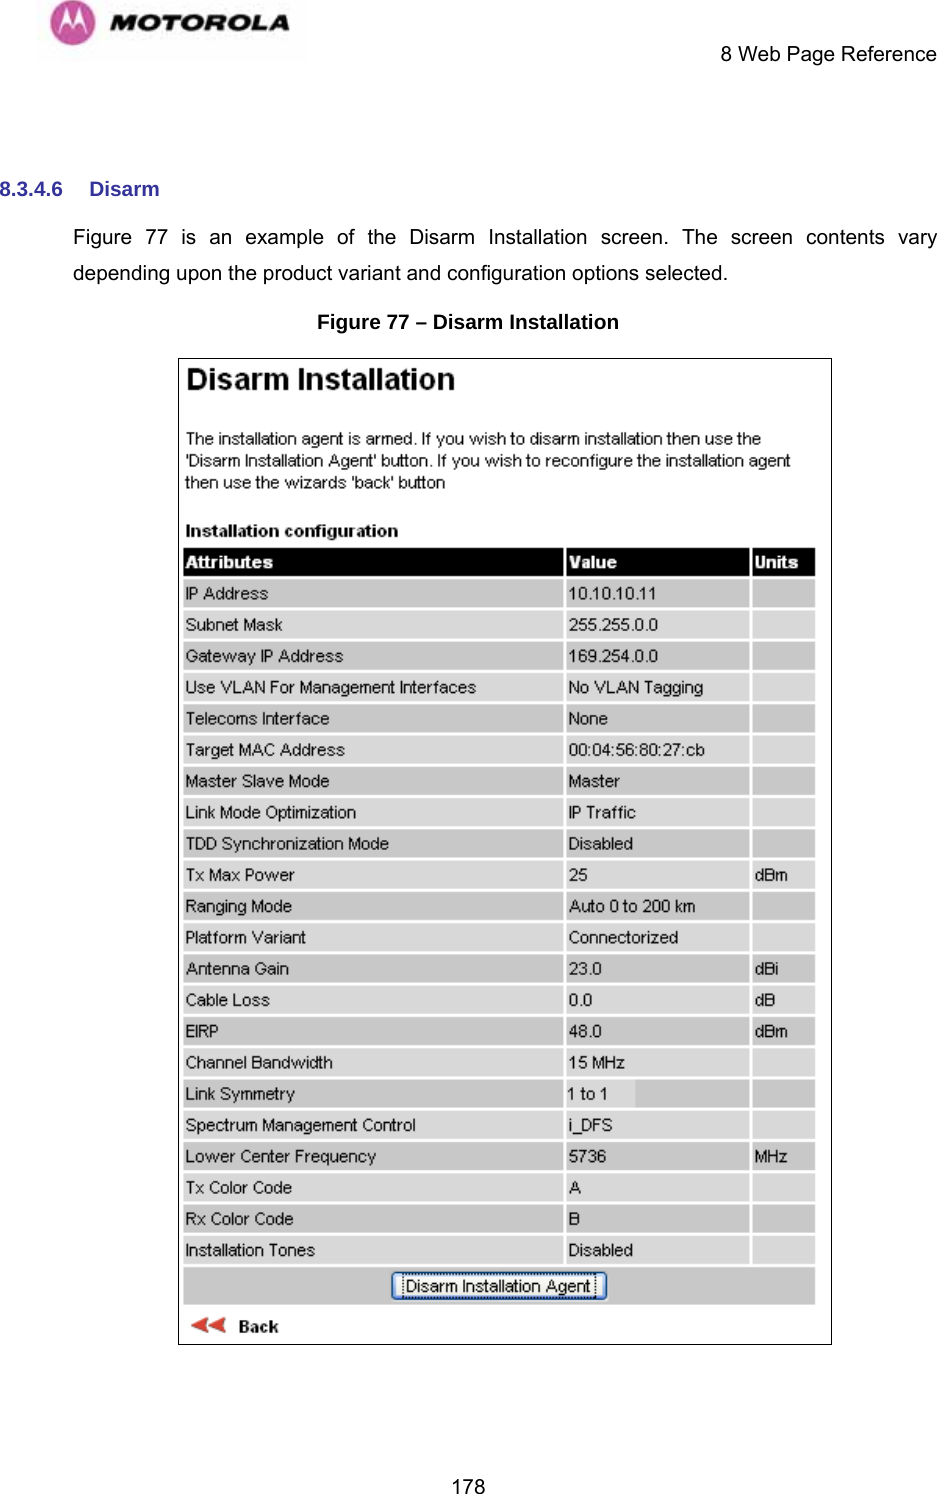     8 Web Page Reference  178 8.3.4.6 Disarm Figure 77 is an example of the Disarm Installation screen. The screen contents vary depending upon the product variant and configuration options selected. Figure 77 – Disarm Installation  